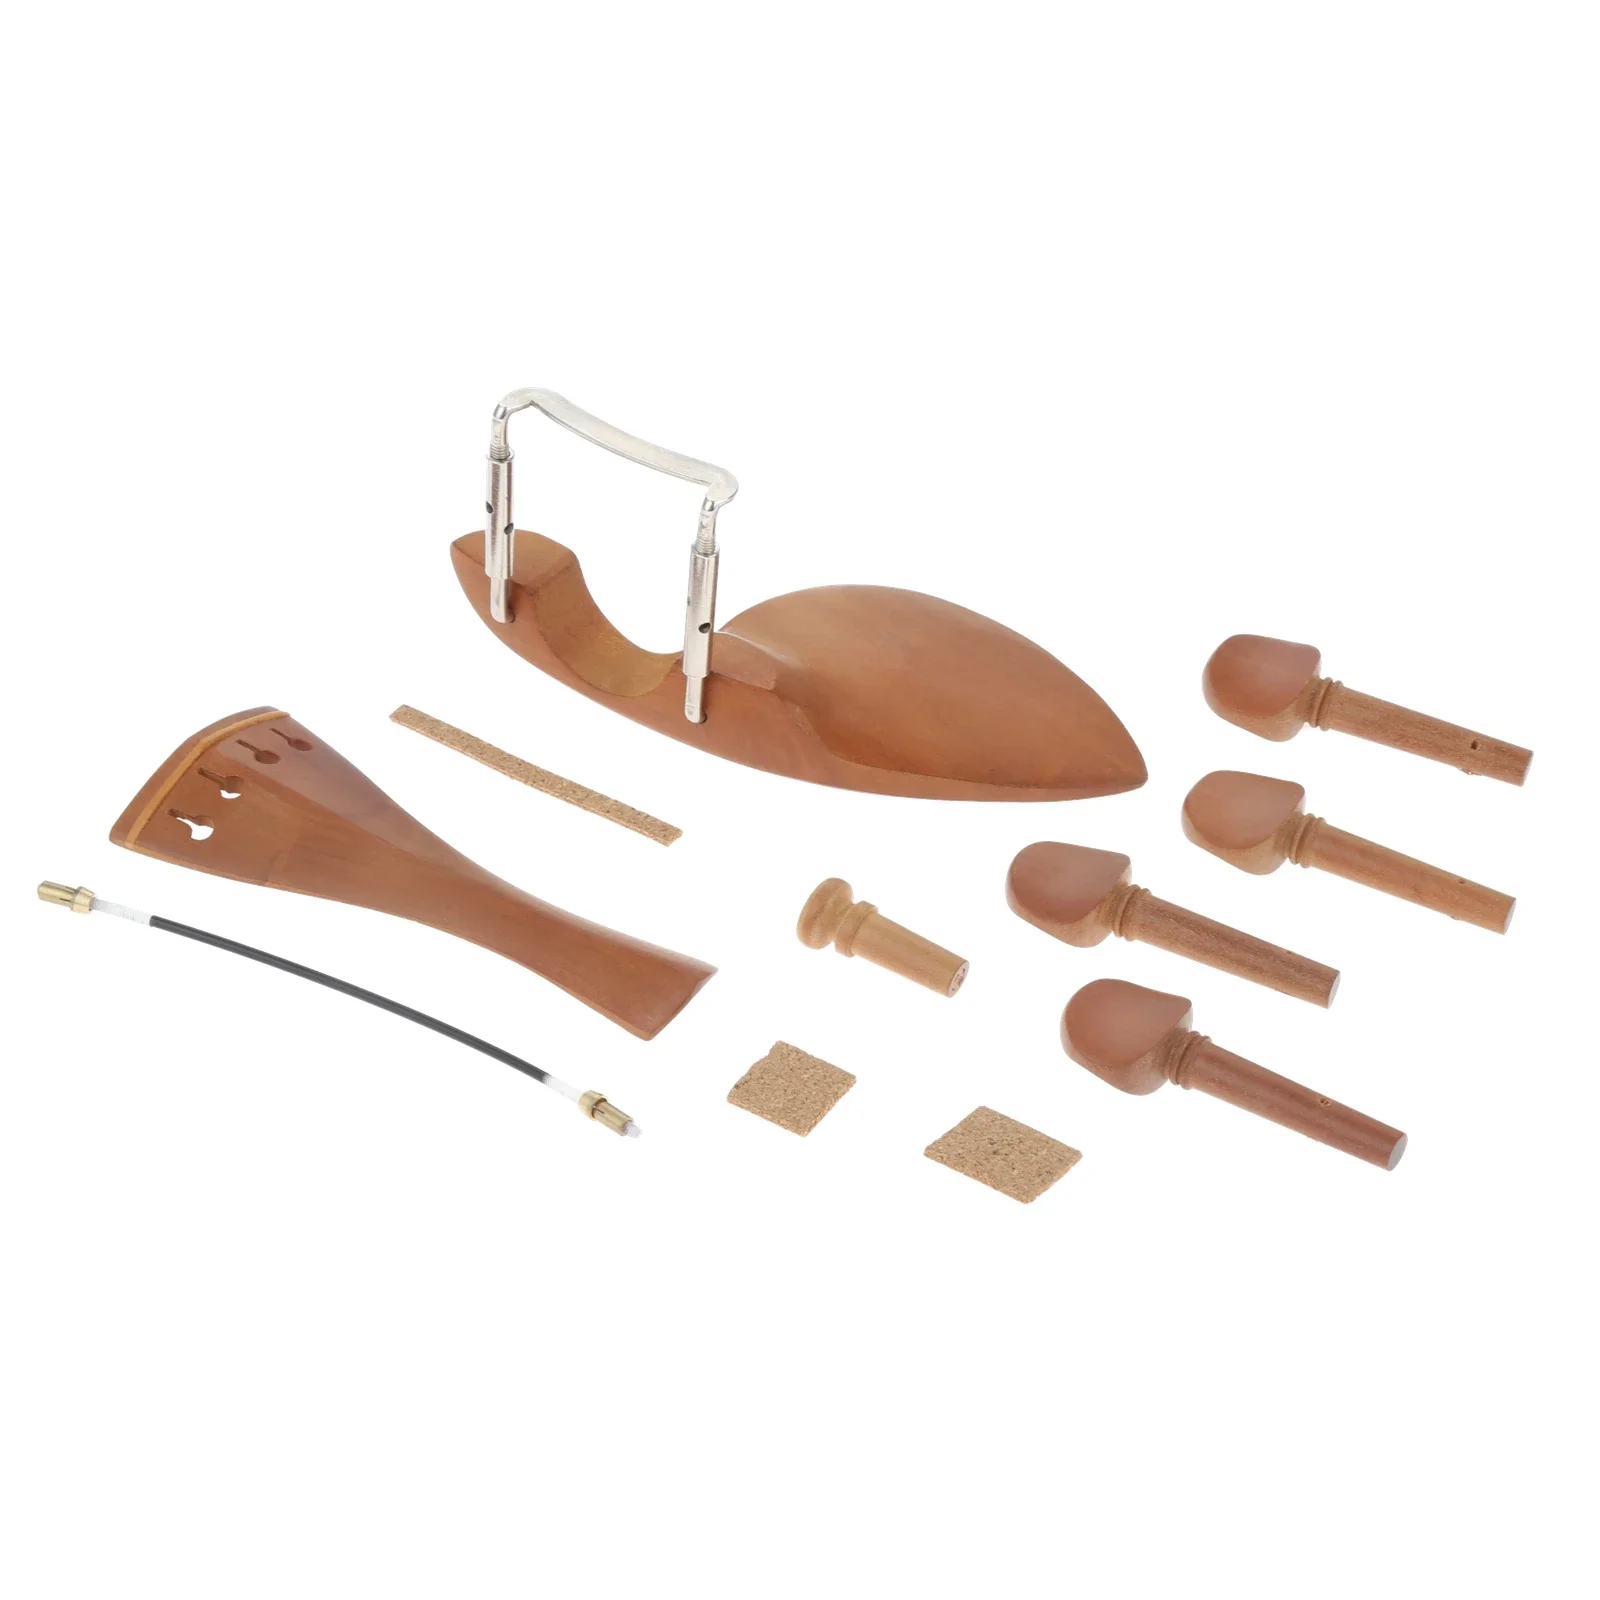 

1 Set Jujube Rosewood 4/4 Violin Accessories Parts Fittings Tailpiece+Tuning Pegs+Endpins+Chinrest/Chin Holder